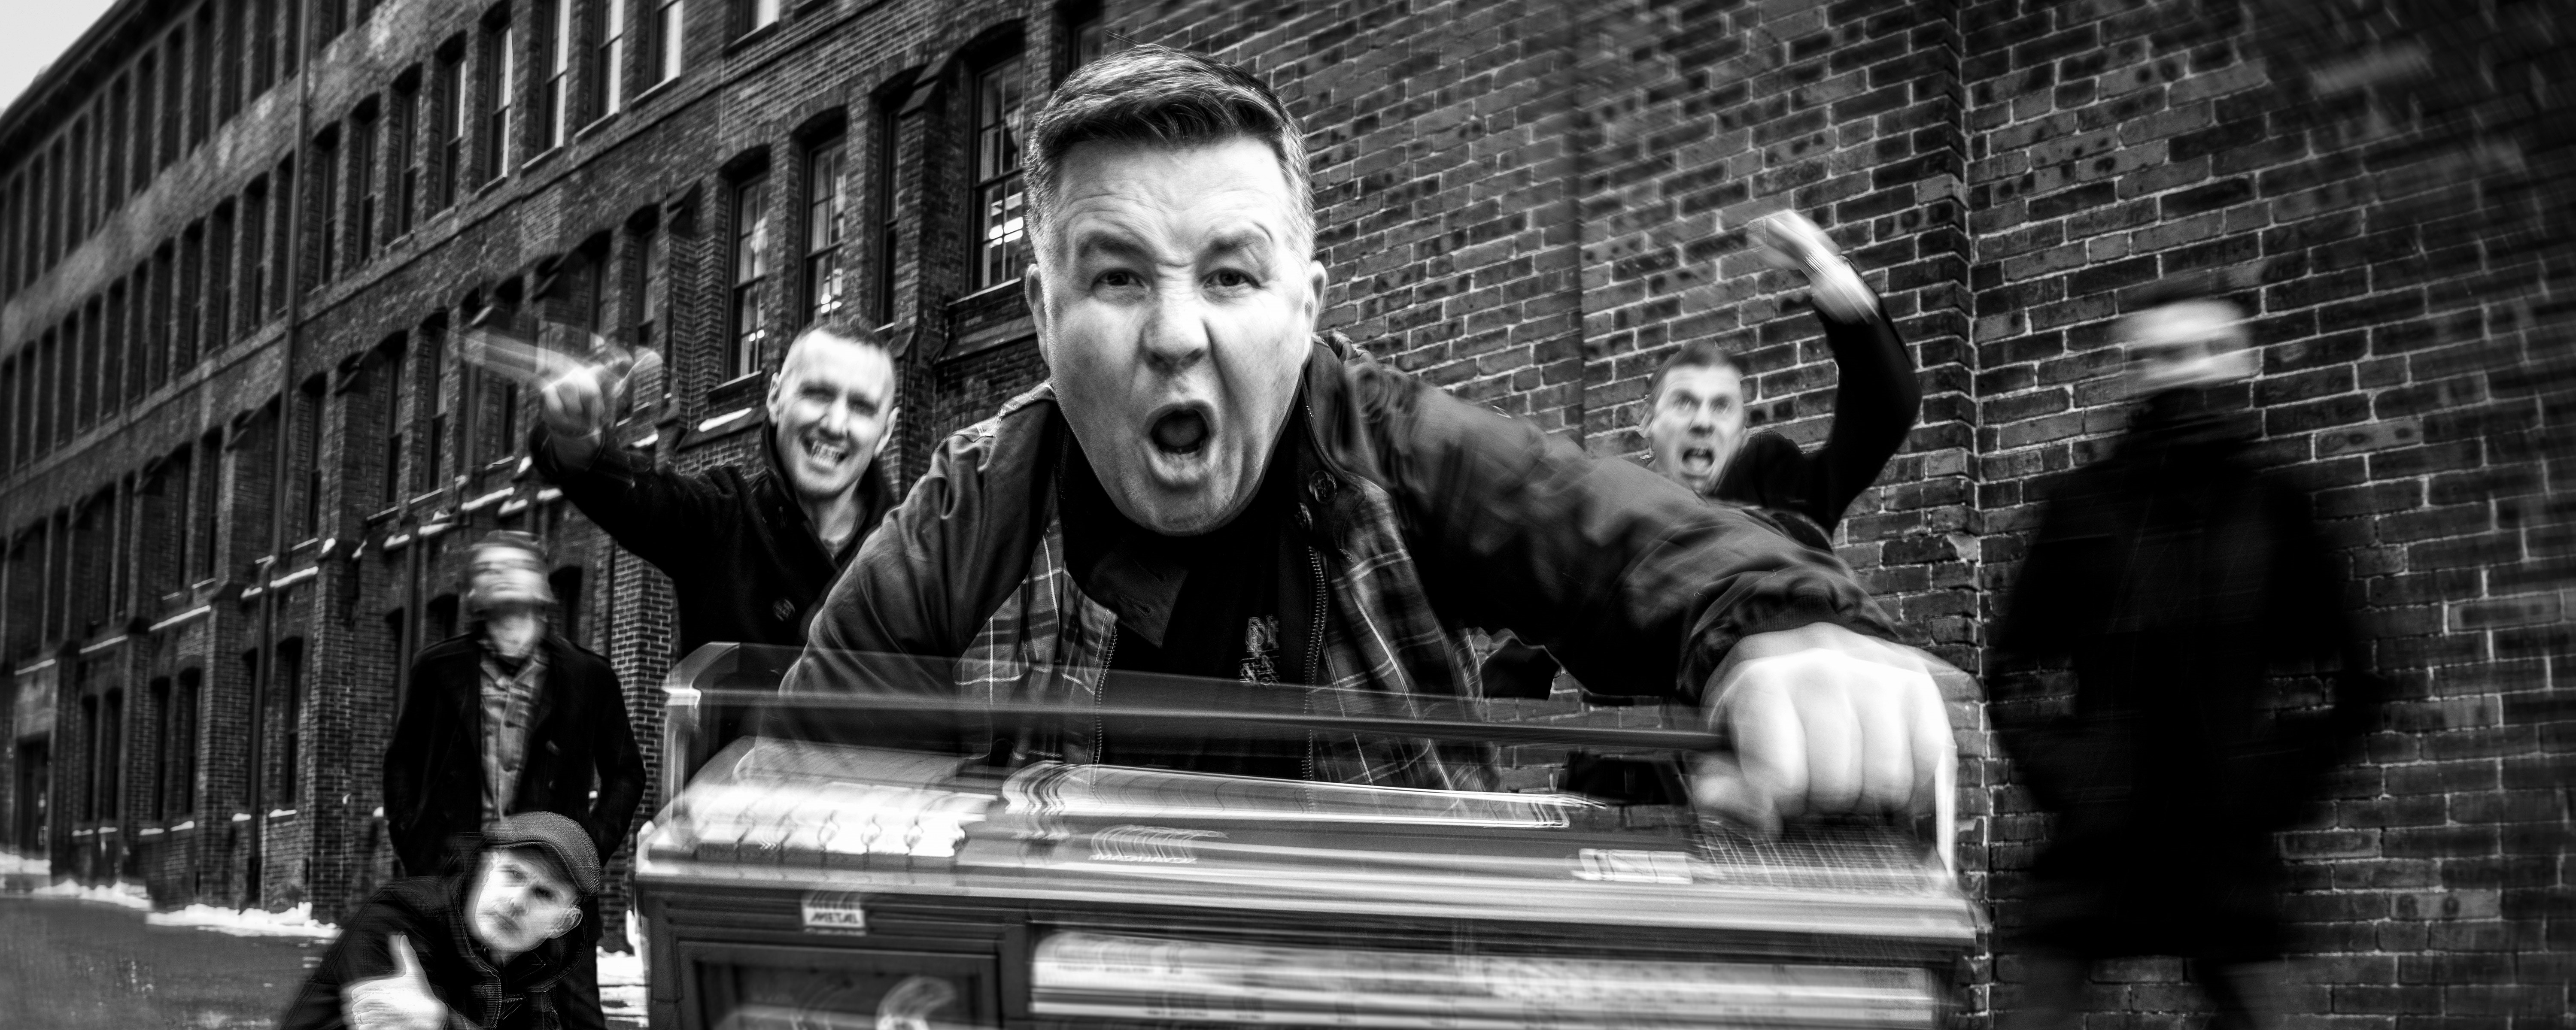 Dropkick Murphys Look Ahead to Better Times for ‘Turn Up That Dial’